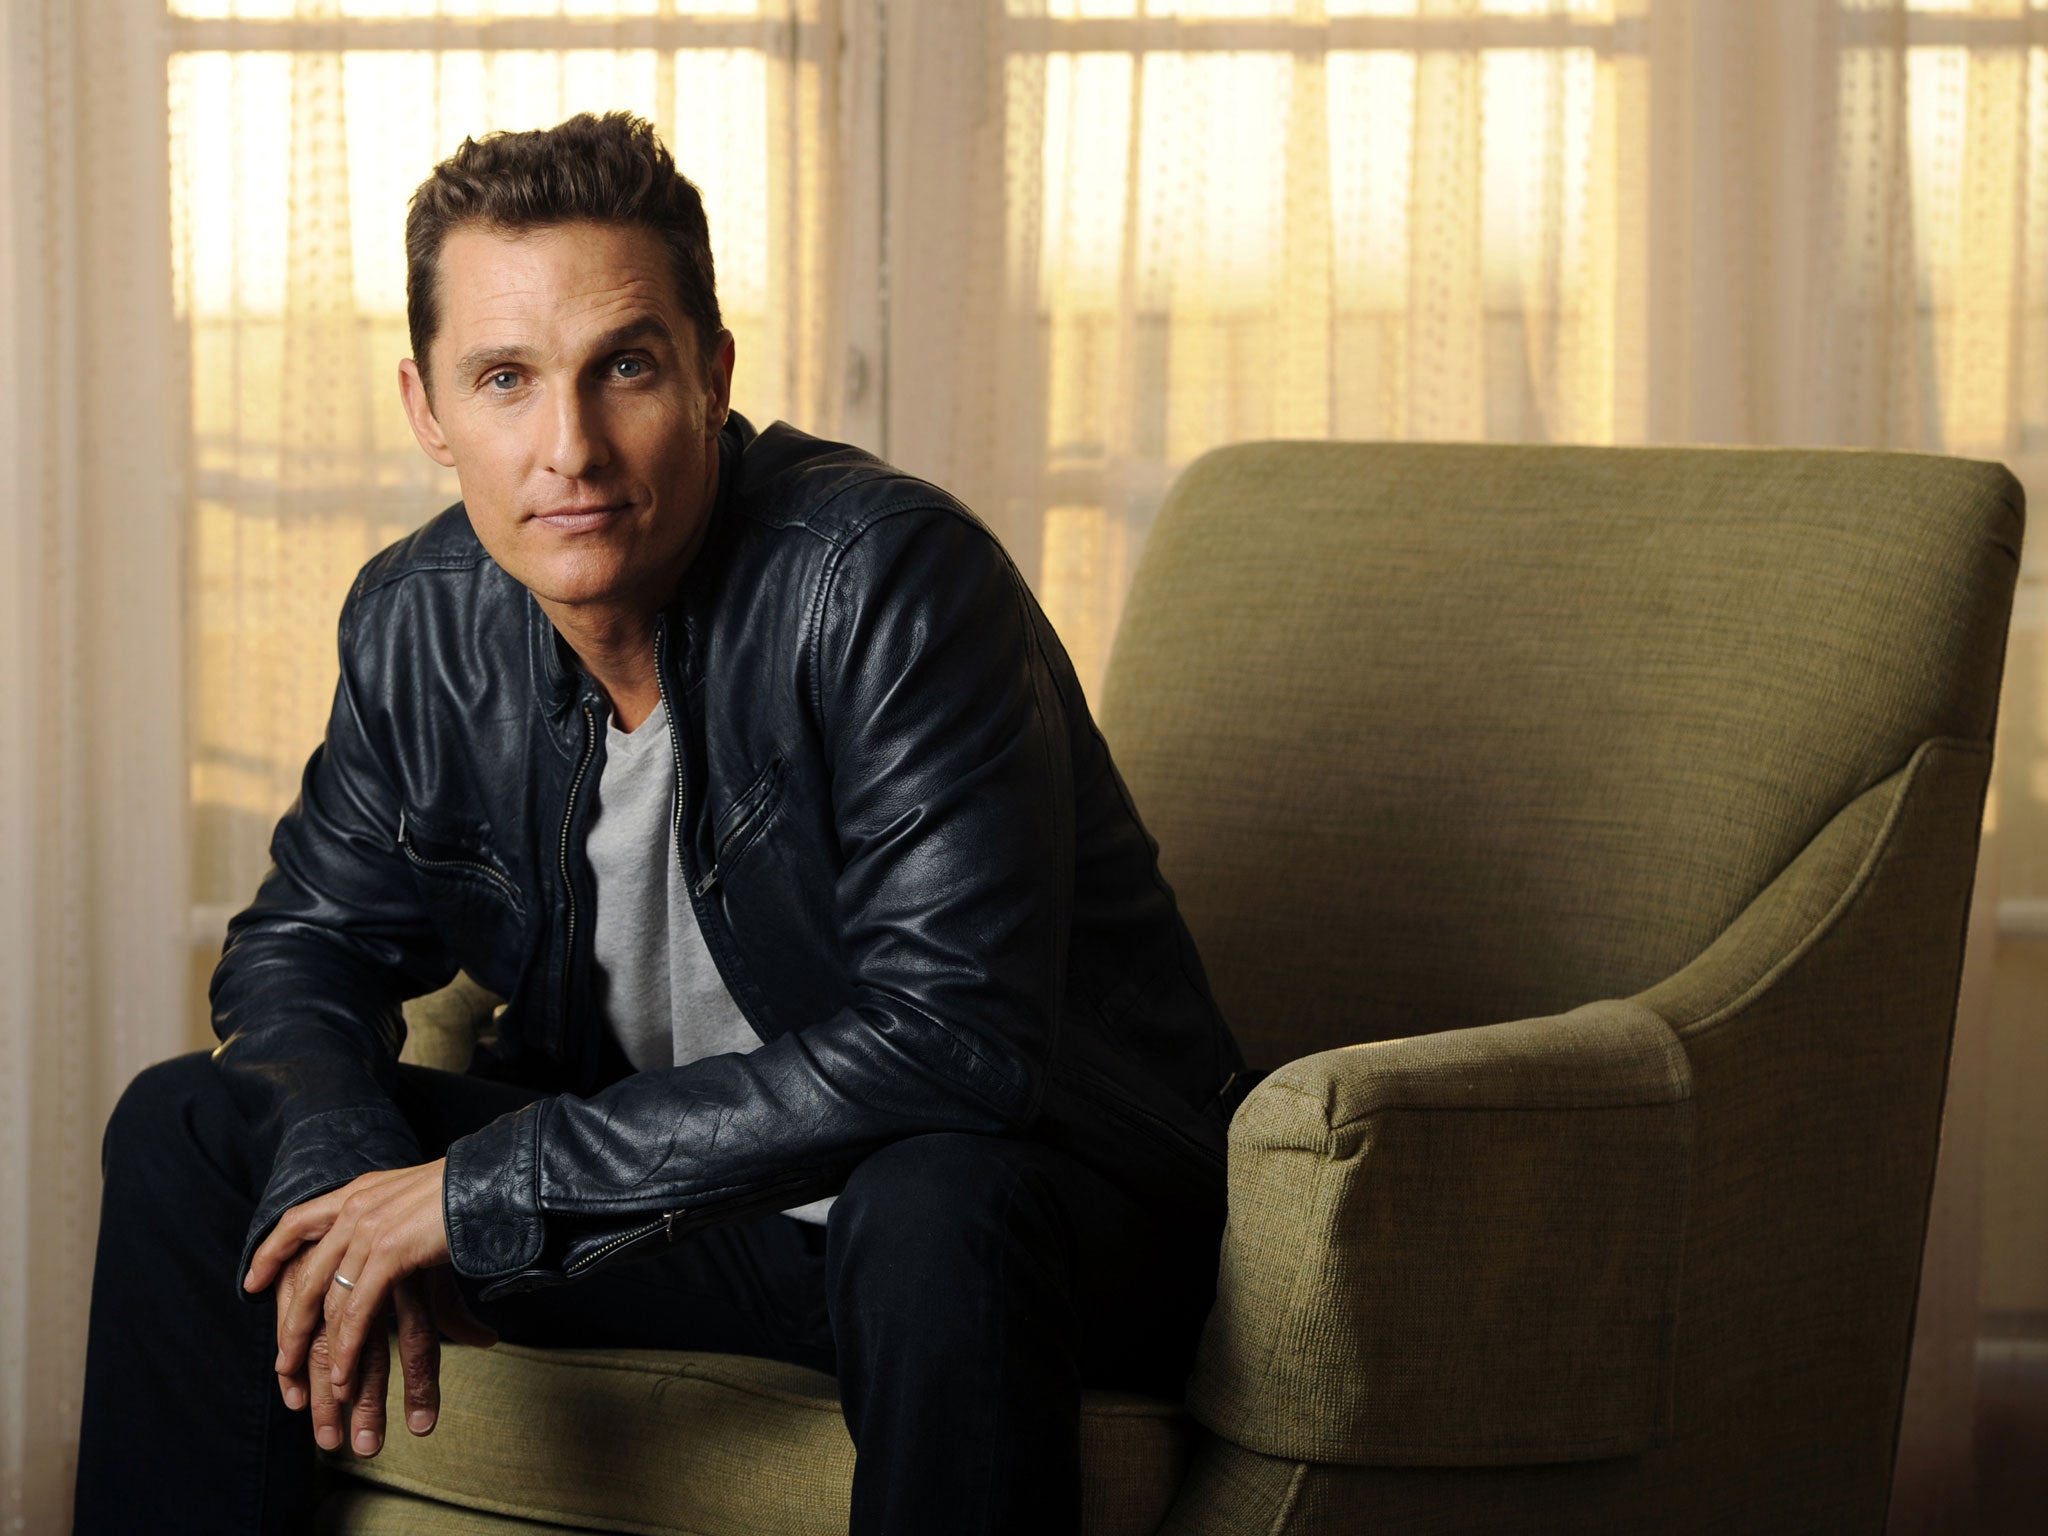 Matthew McConaughey took a break to get off the road and start a family - now he's more settled, landing leads and winning big awards